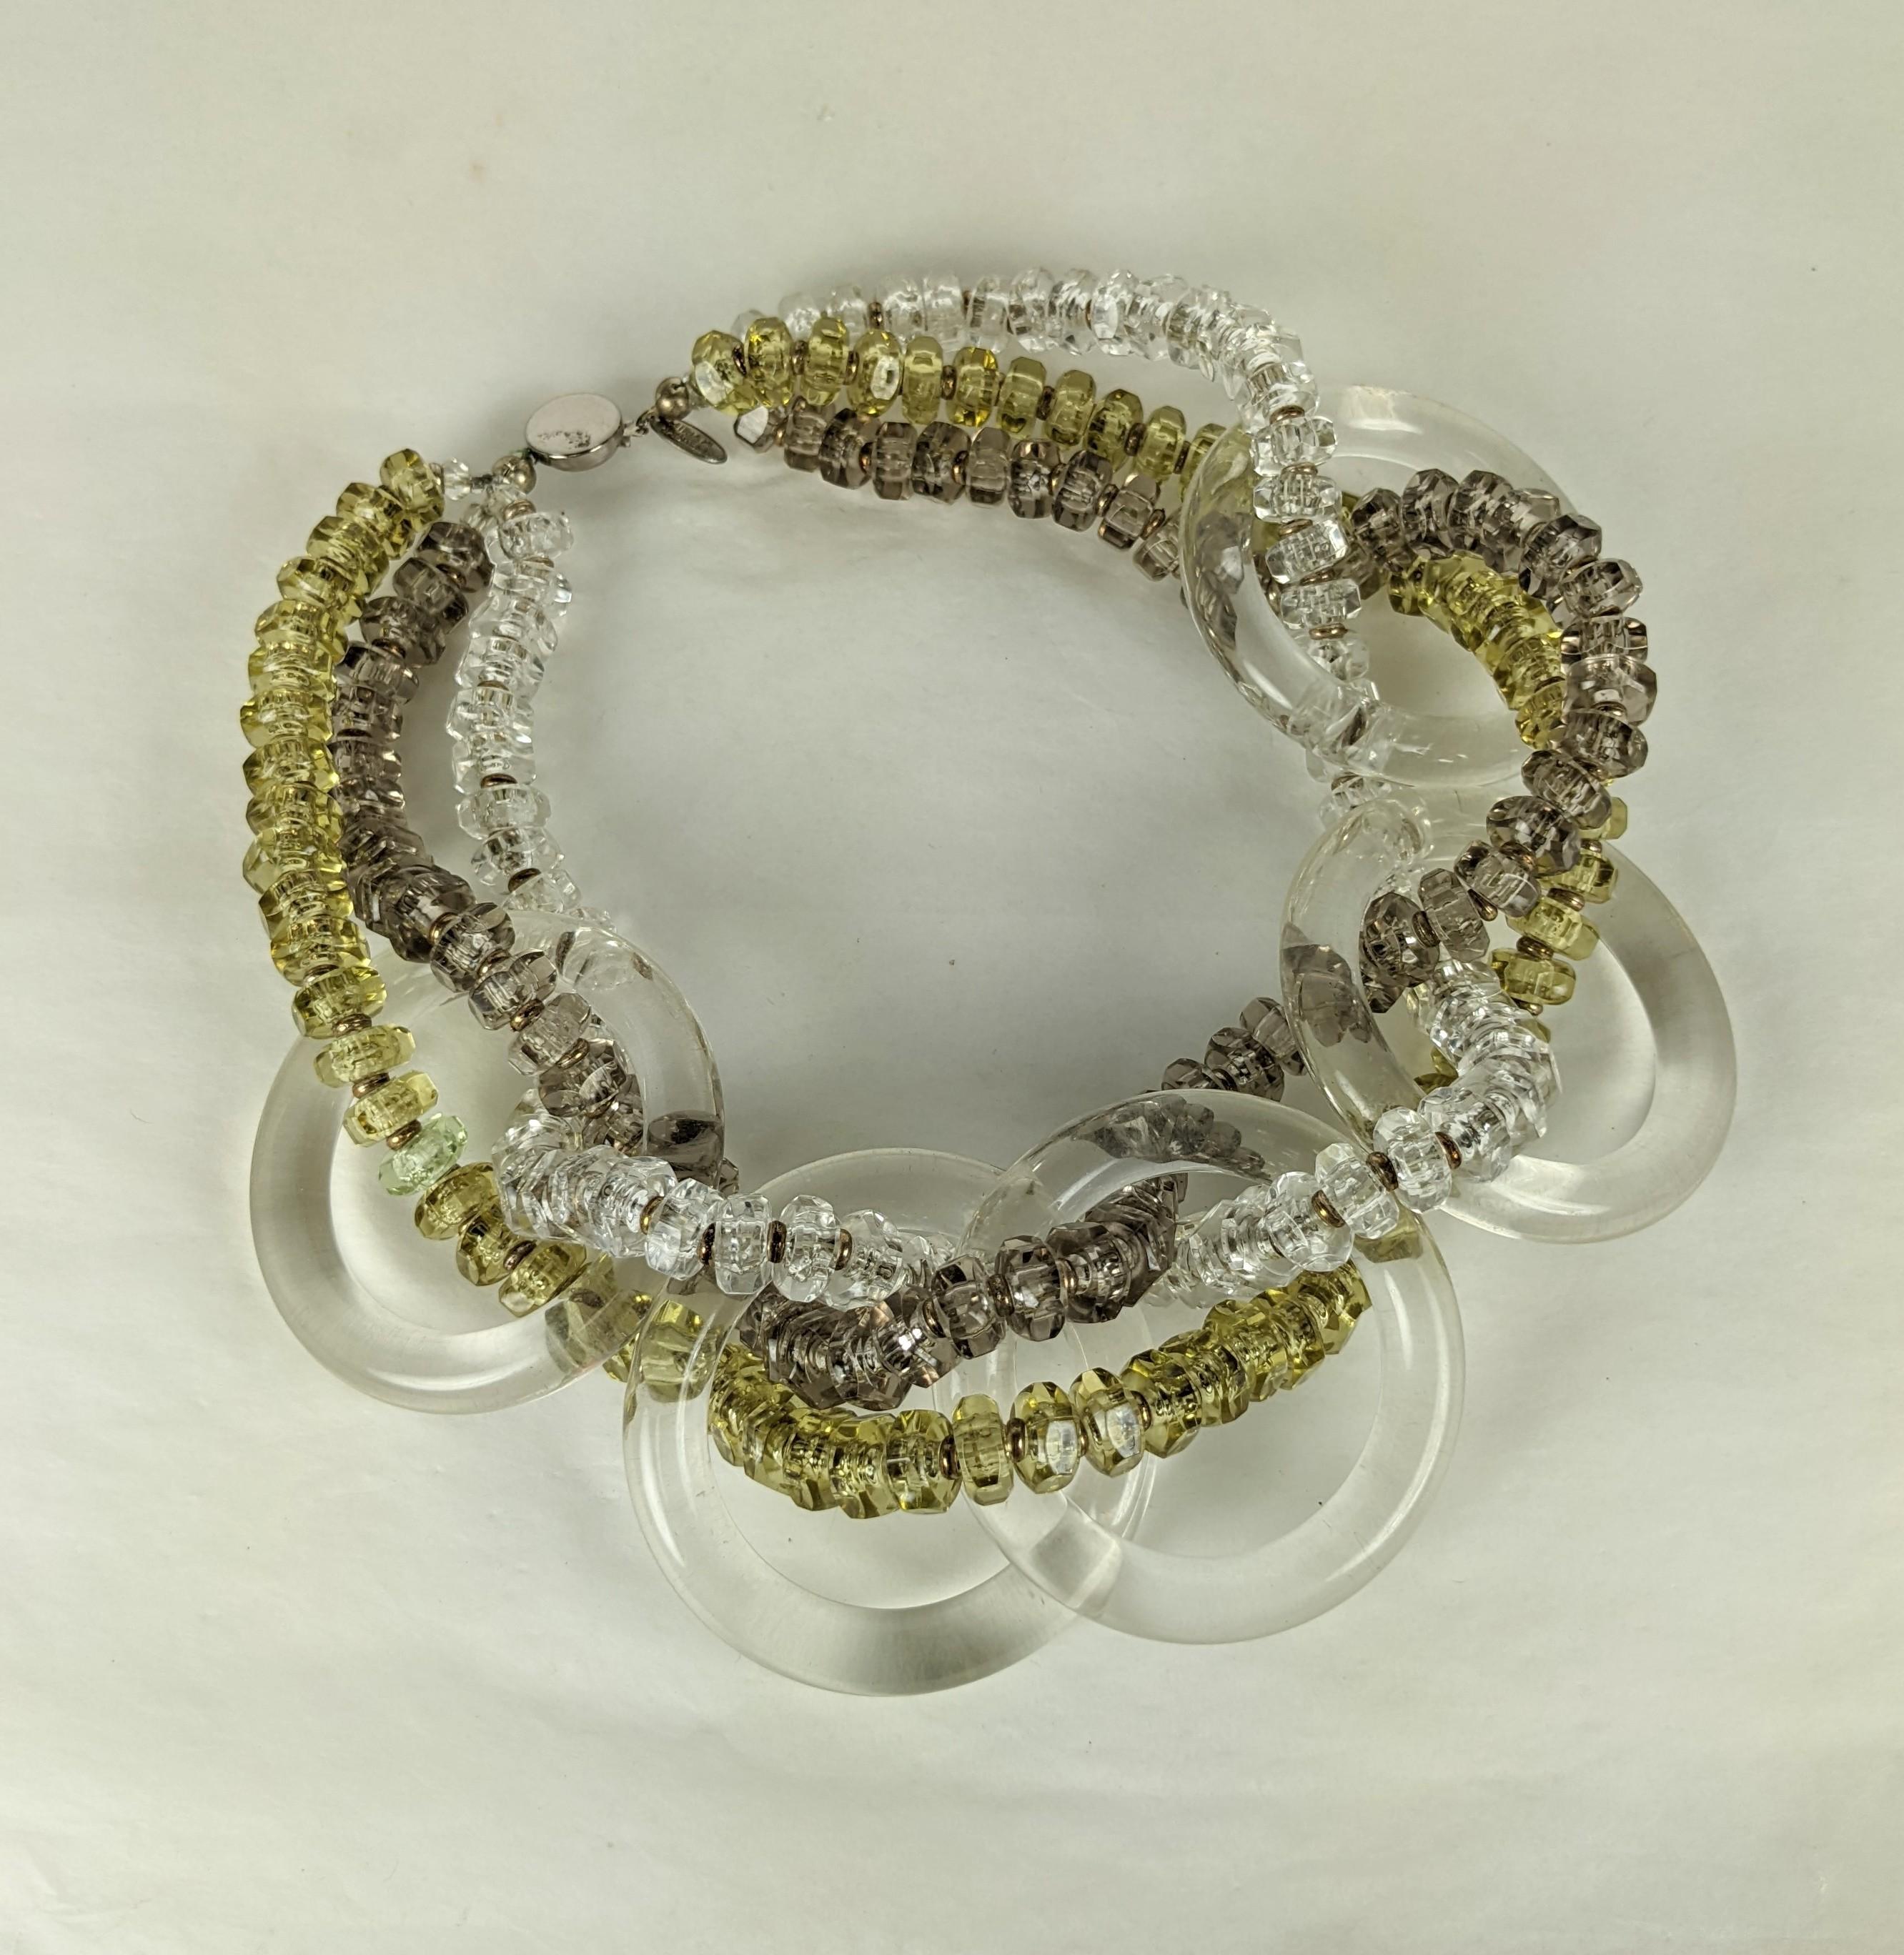 Modernist Miriam Haskell Lucite Hoop Statement Necklace For Sale